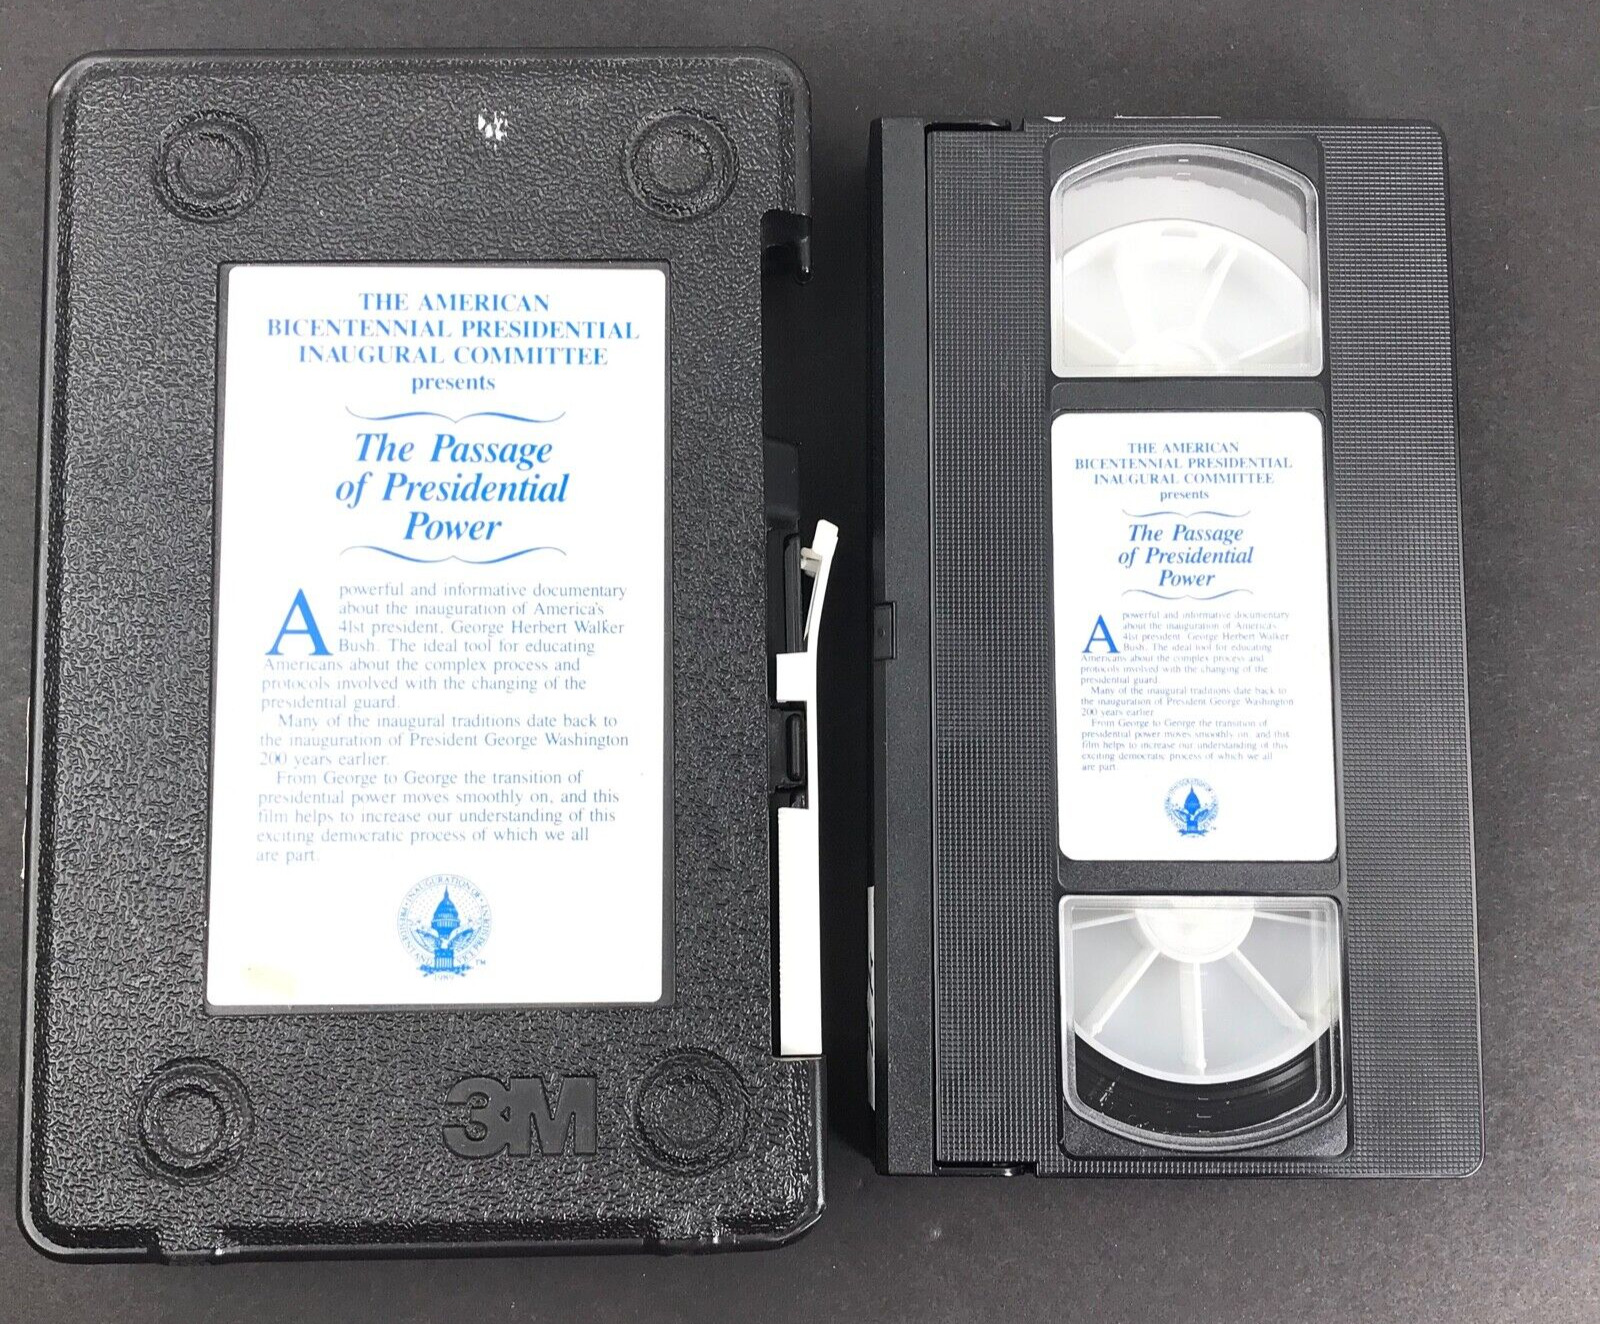 The Passage Of Presidential Power, VHS American Presidential Inaugural Committee